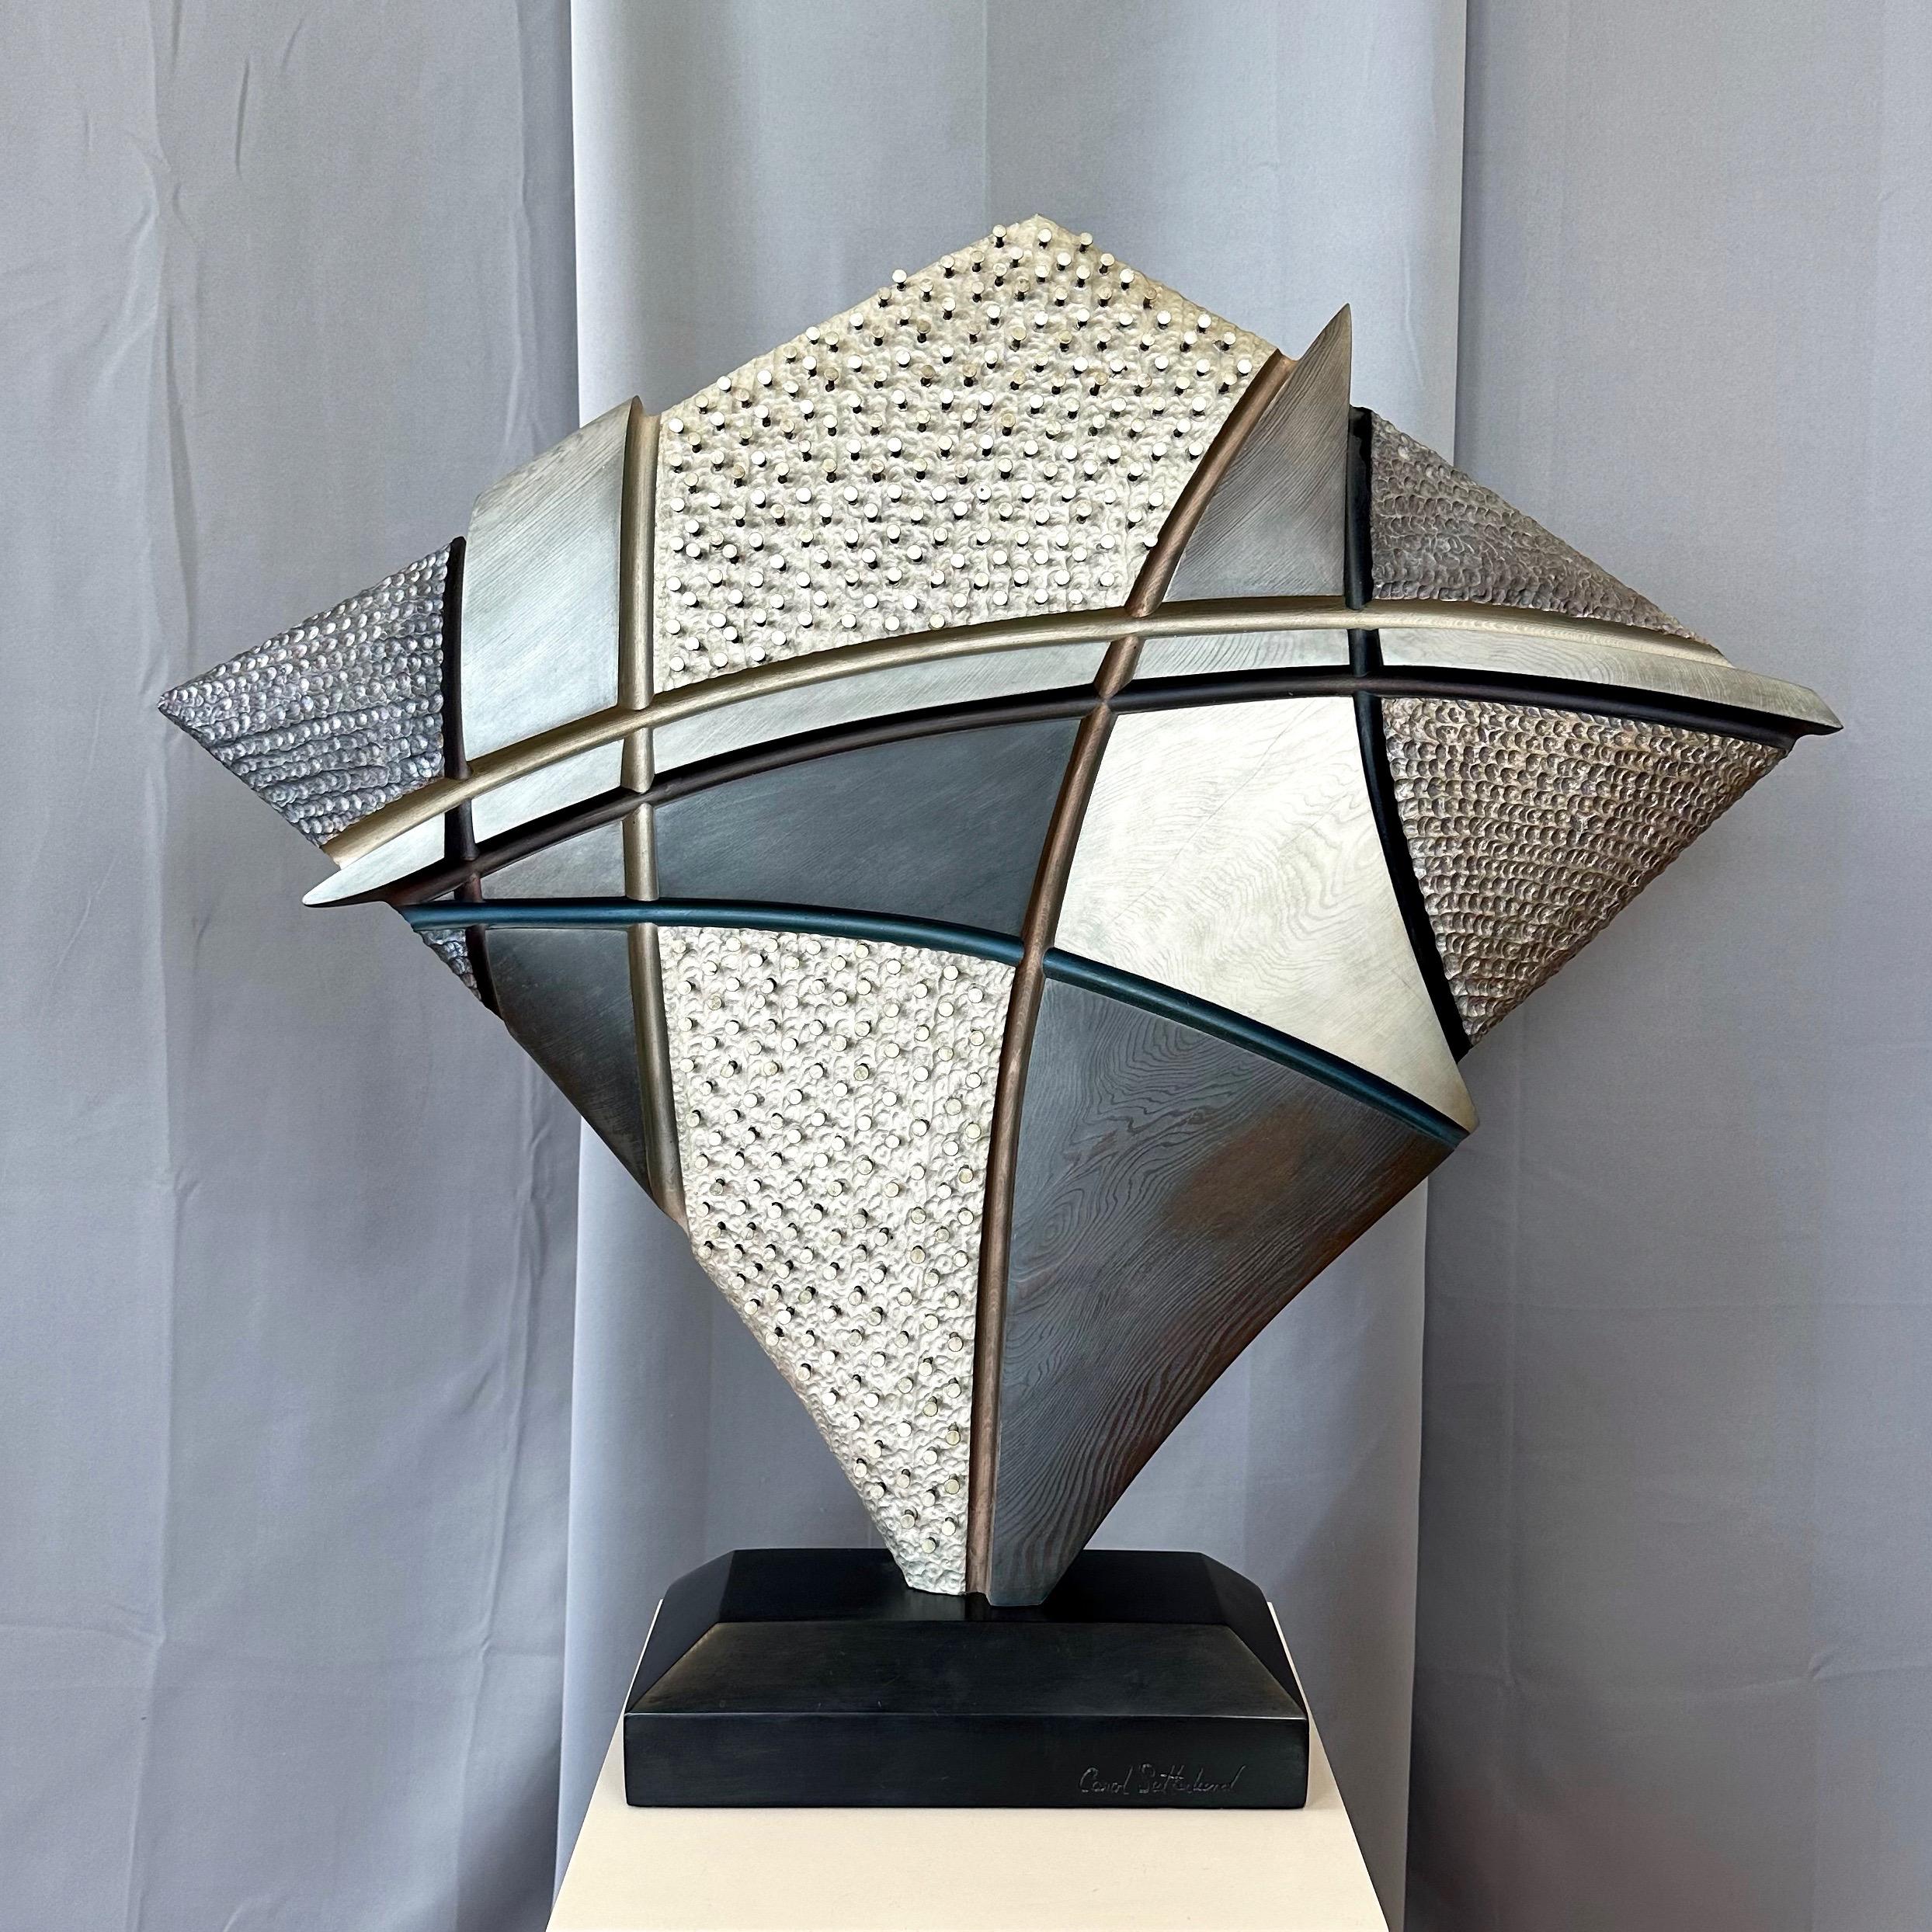 A large 1980s abstract mixed-media wood sculpture titled “Martyr’s Shield” by notable Northern California artist Carol Setterlund.

Hand-carved from a single piece of solid redwood with various geometric forms, textures, and intersecting lines